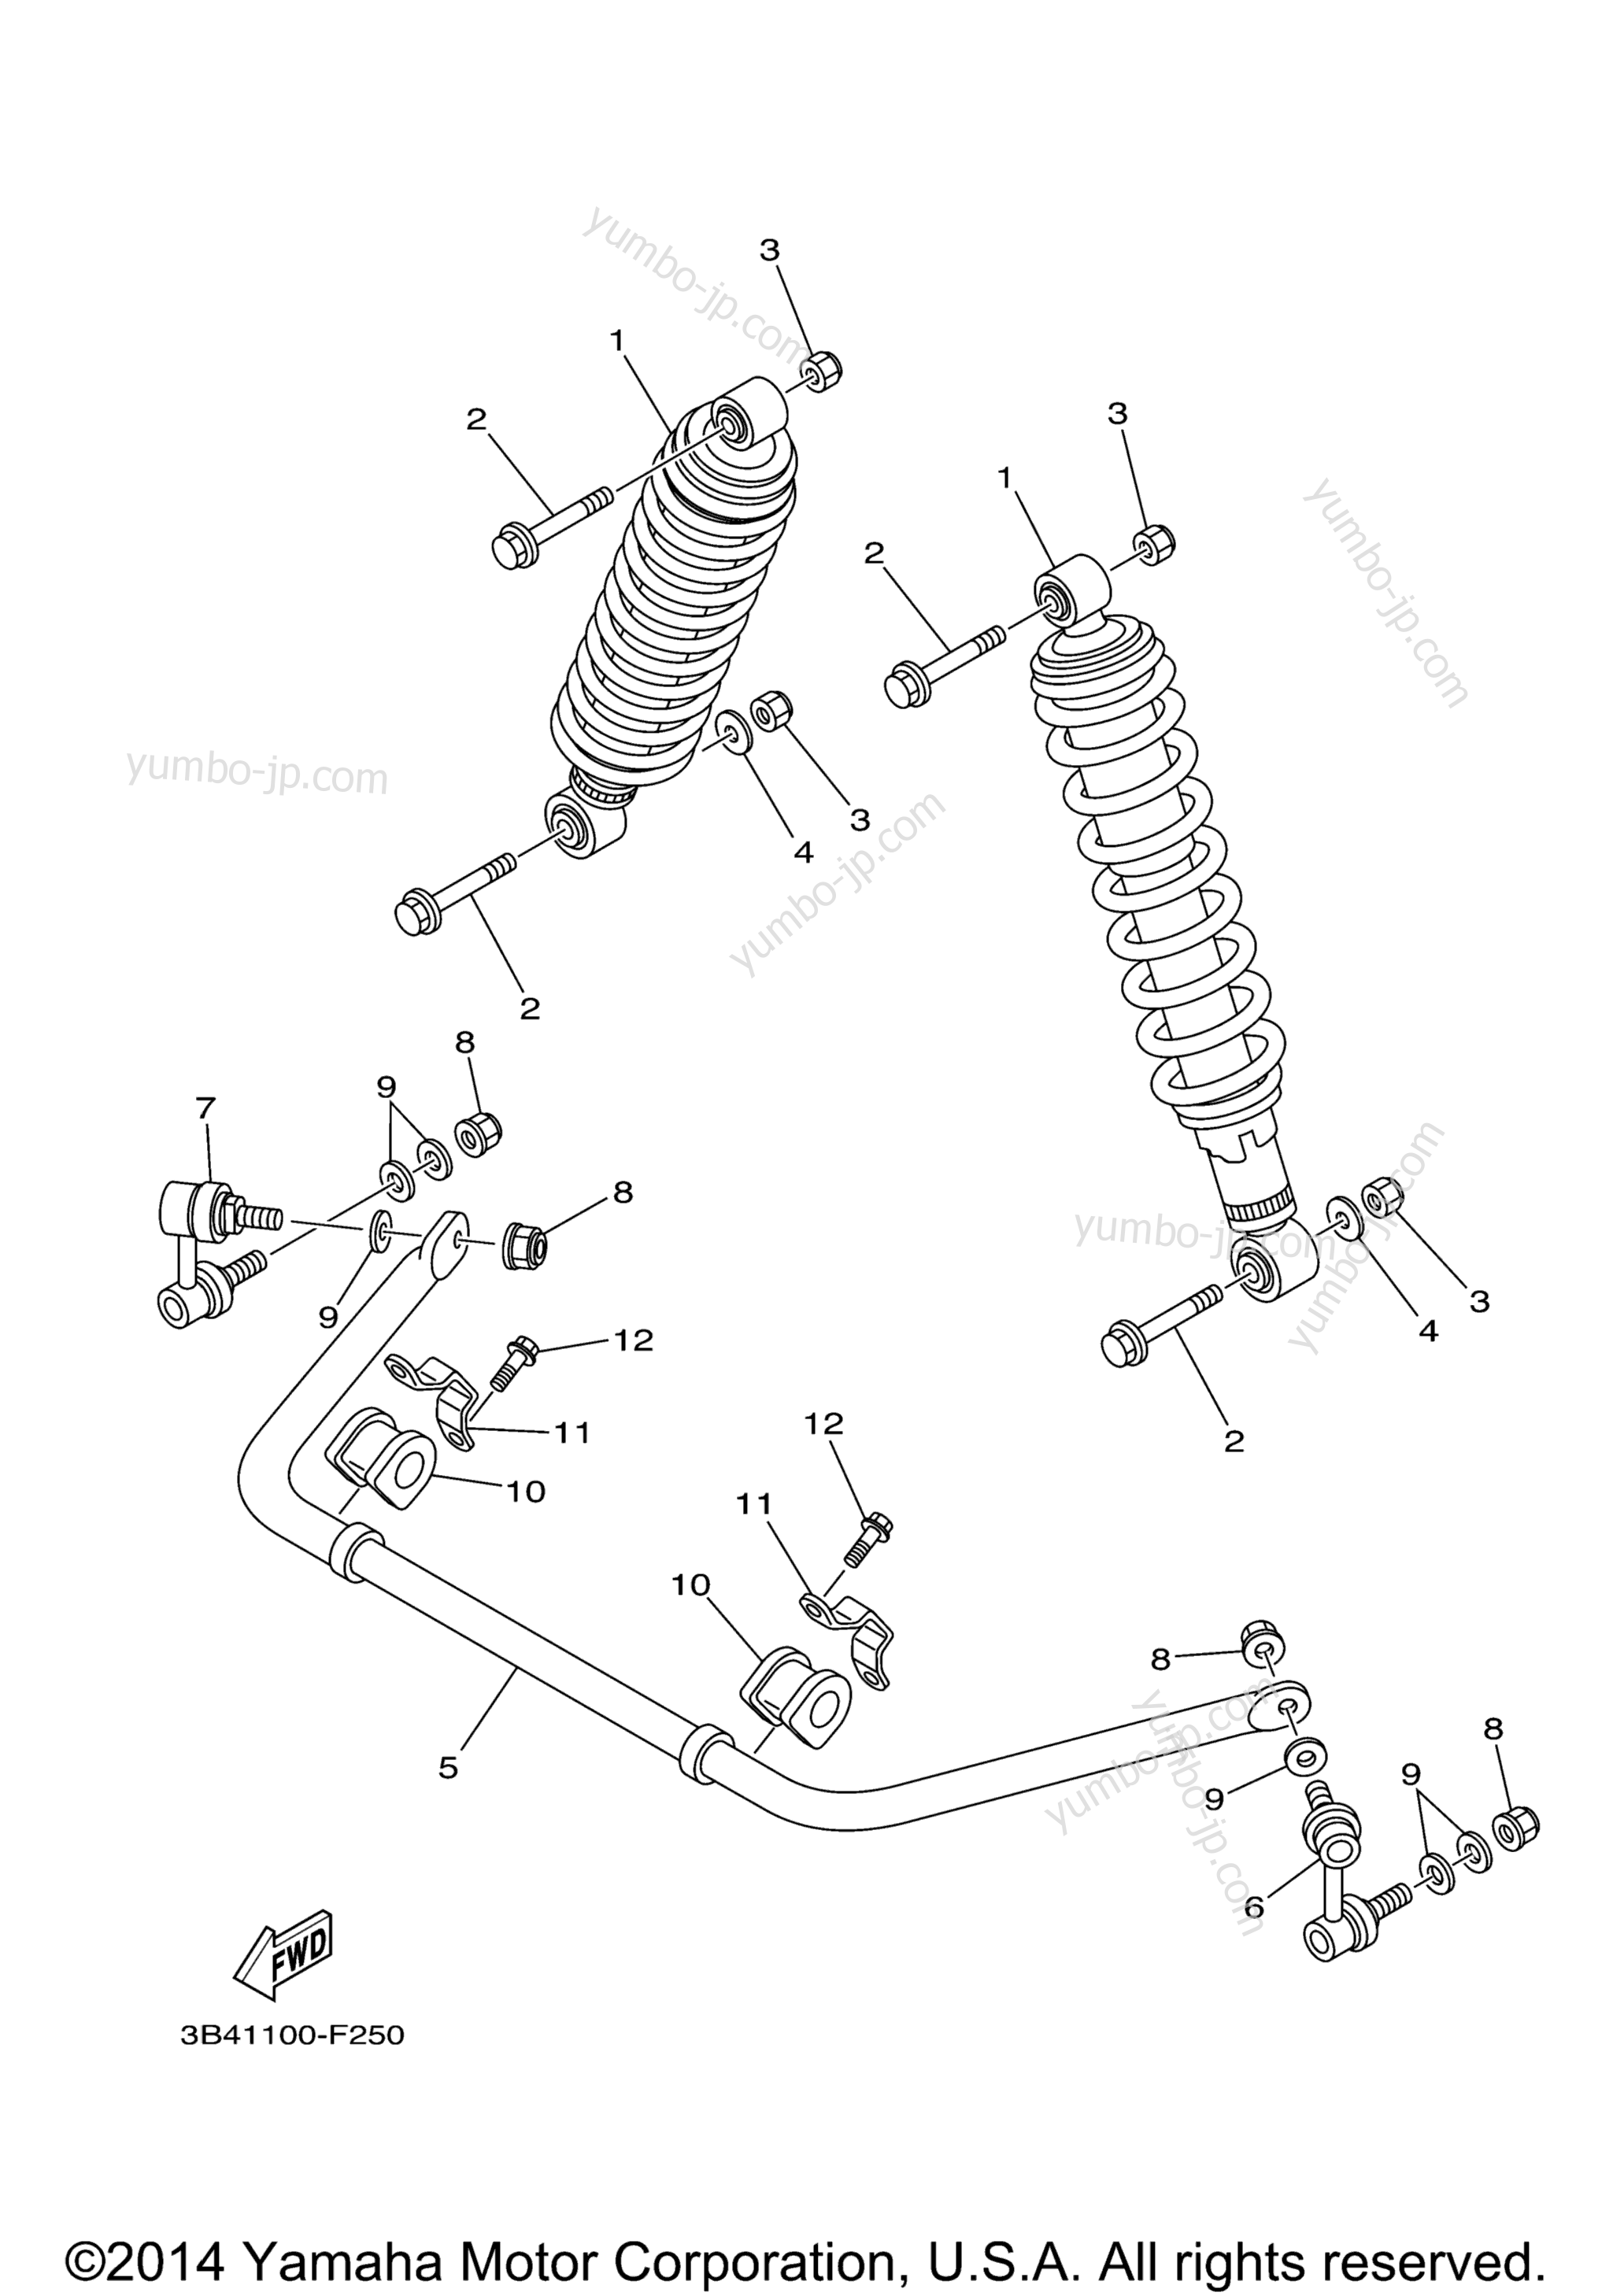 Rear Suspension for ATVs YAMAHA GRIZZLY 550 EPS 4WD (YFM5FGPAGR) 2011 year